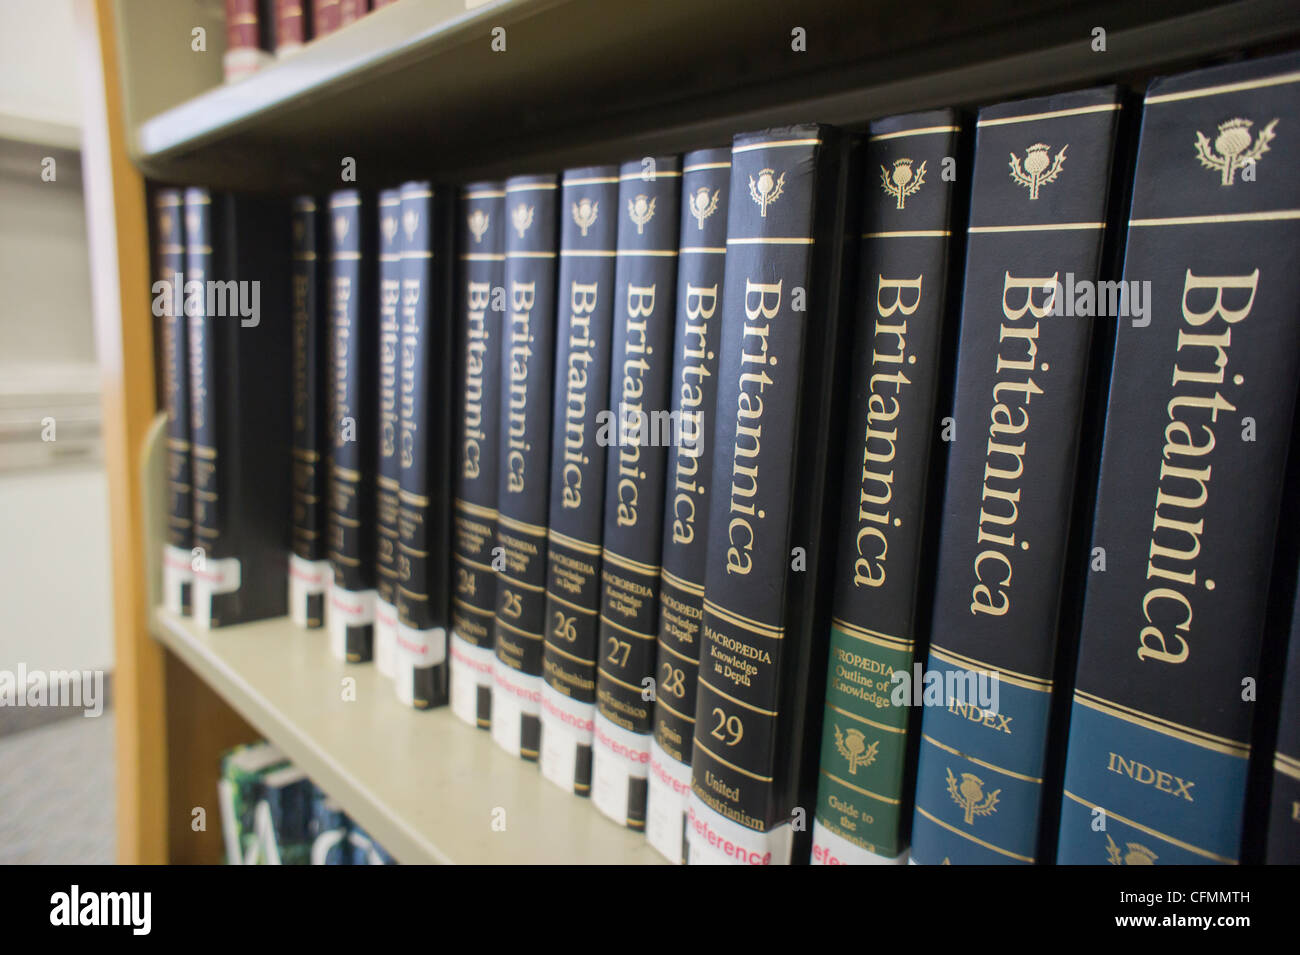 The multi-volume Encyclopaedia Britannica is seen on a library reference shelf in New York Stock Photo